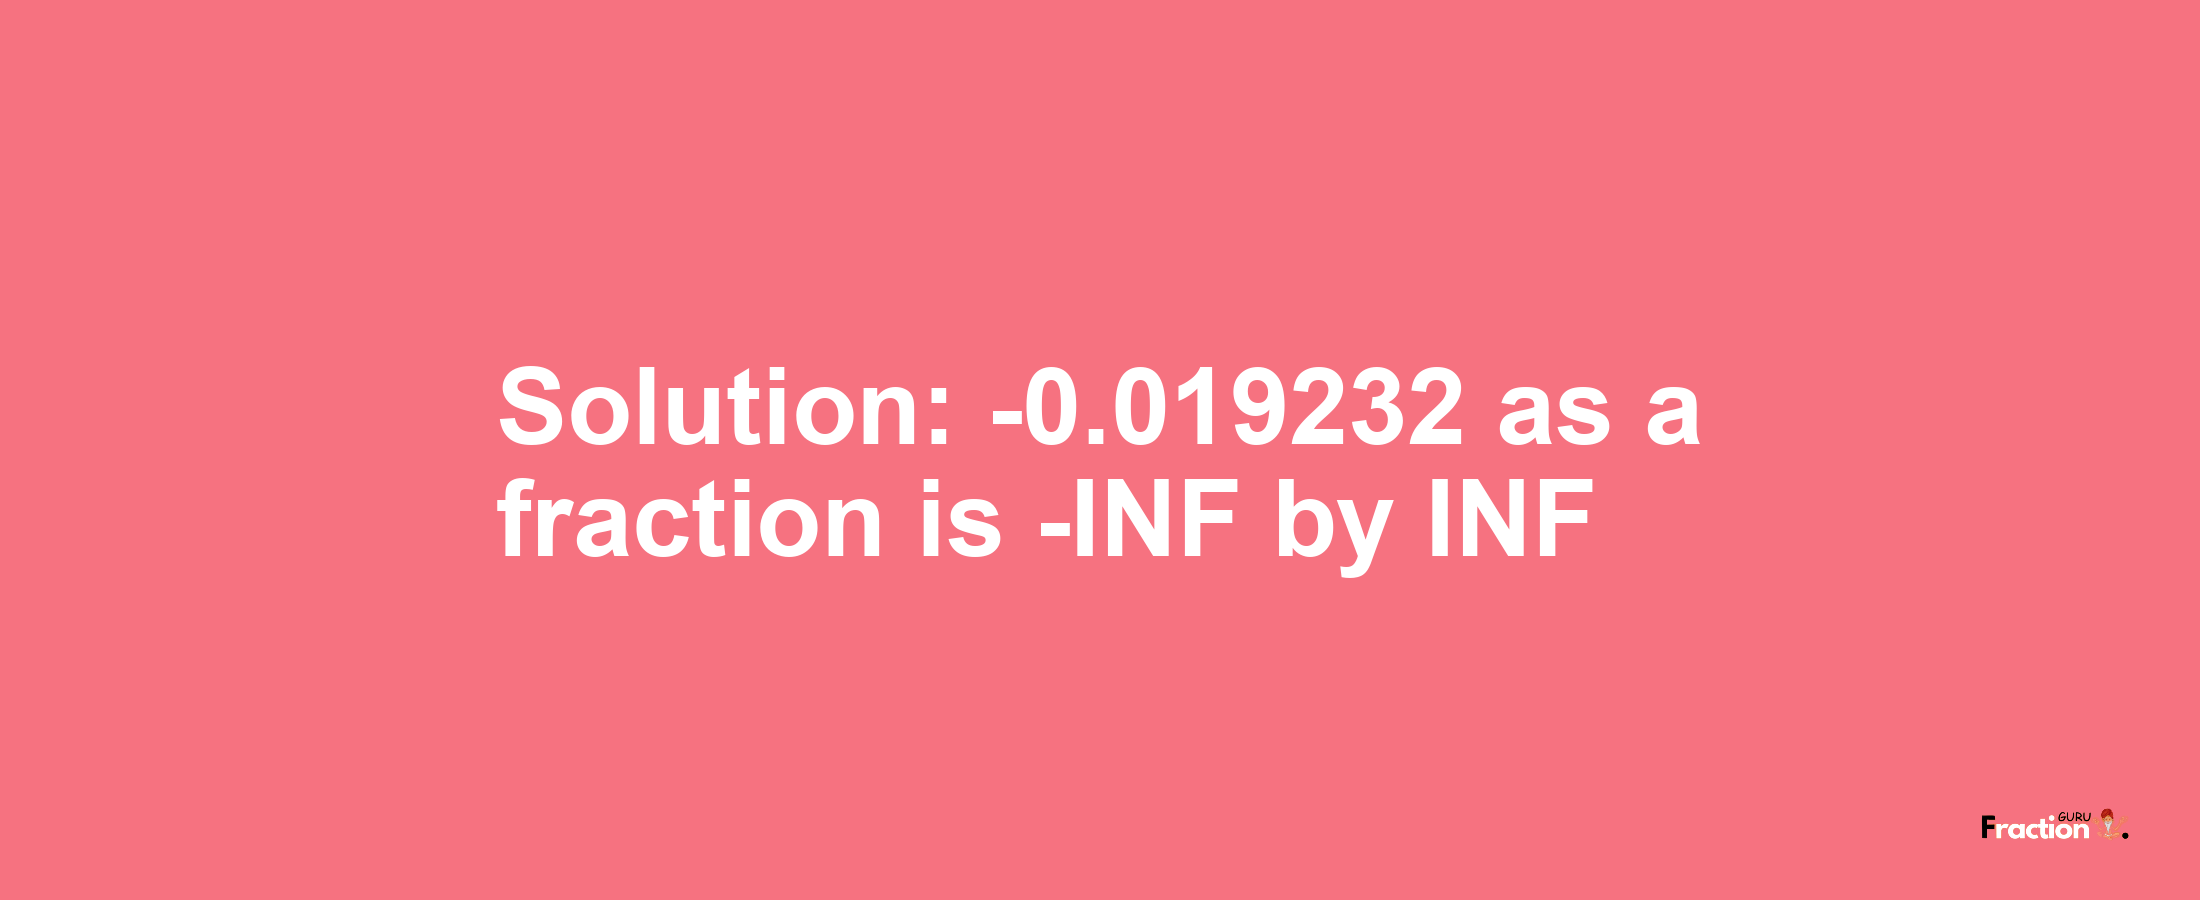 Solution:-0.019232 as a fraction is -INF/INF